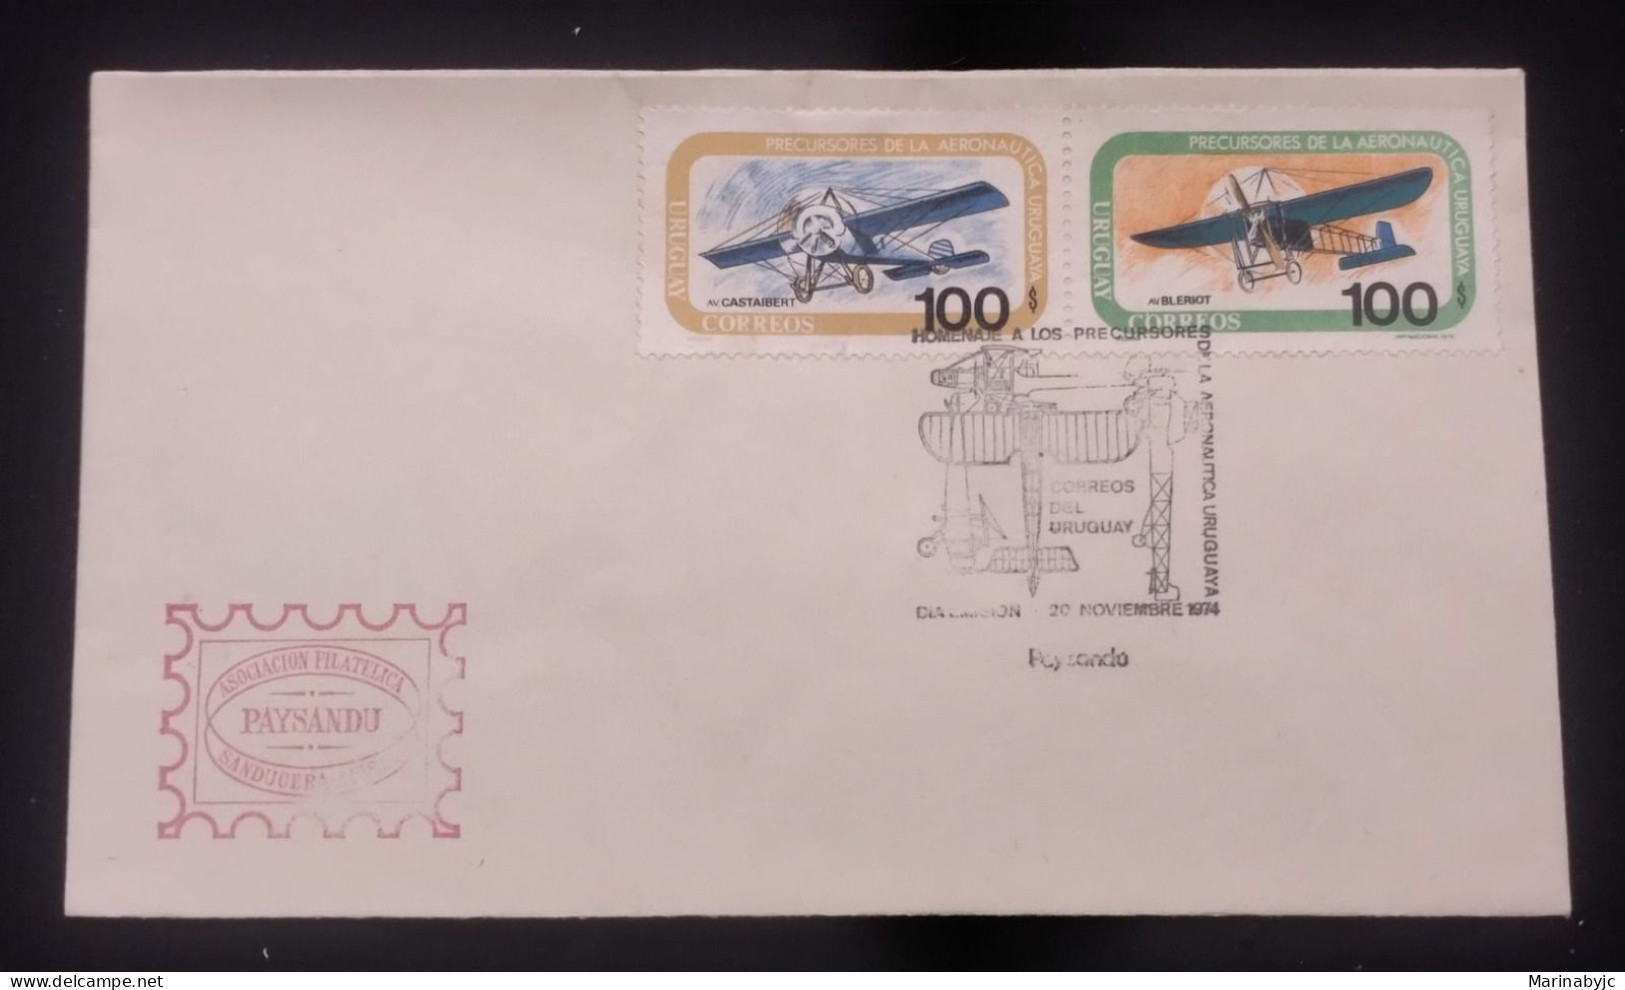 D)1974, URUGUAY, FIRST DAY COVER, ISSUE, HISTORY OF AVIATION, CASTAIBERT MONOPLANE, BLÉRIOT MONOPLANE, FDC - Uruguay